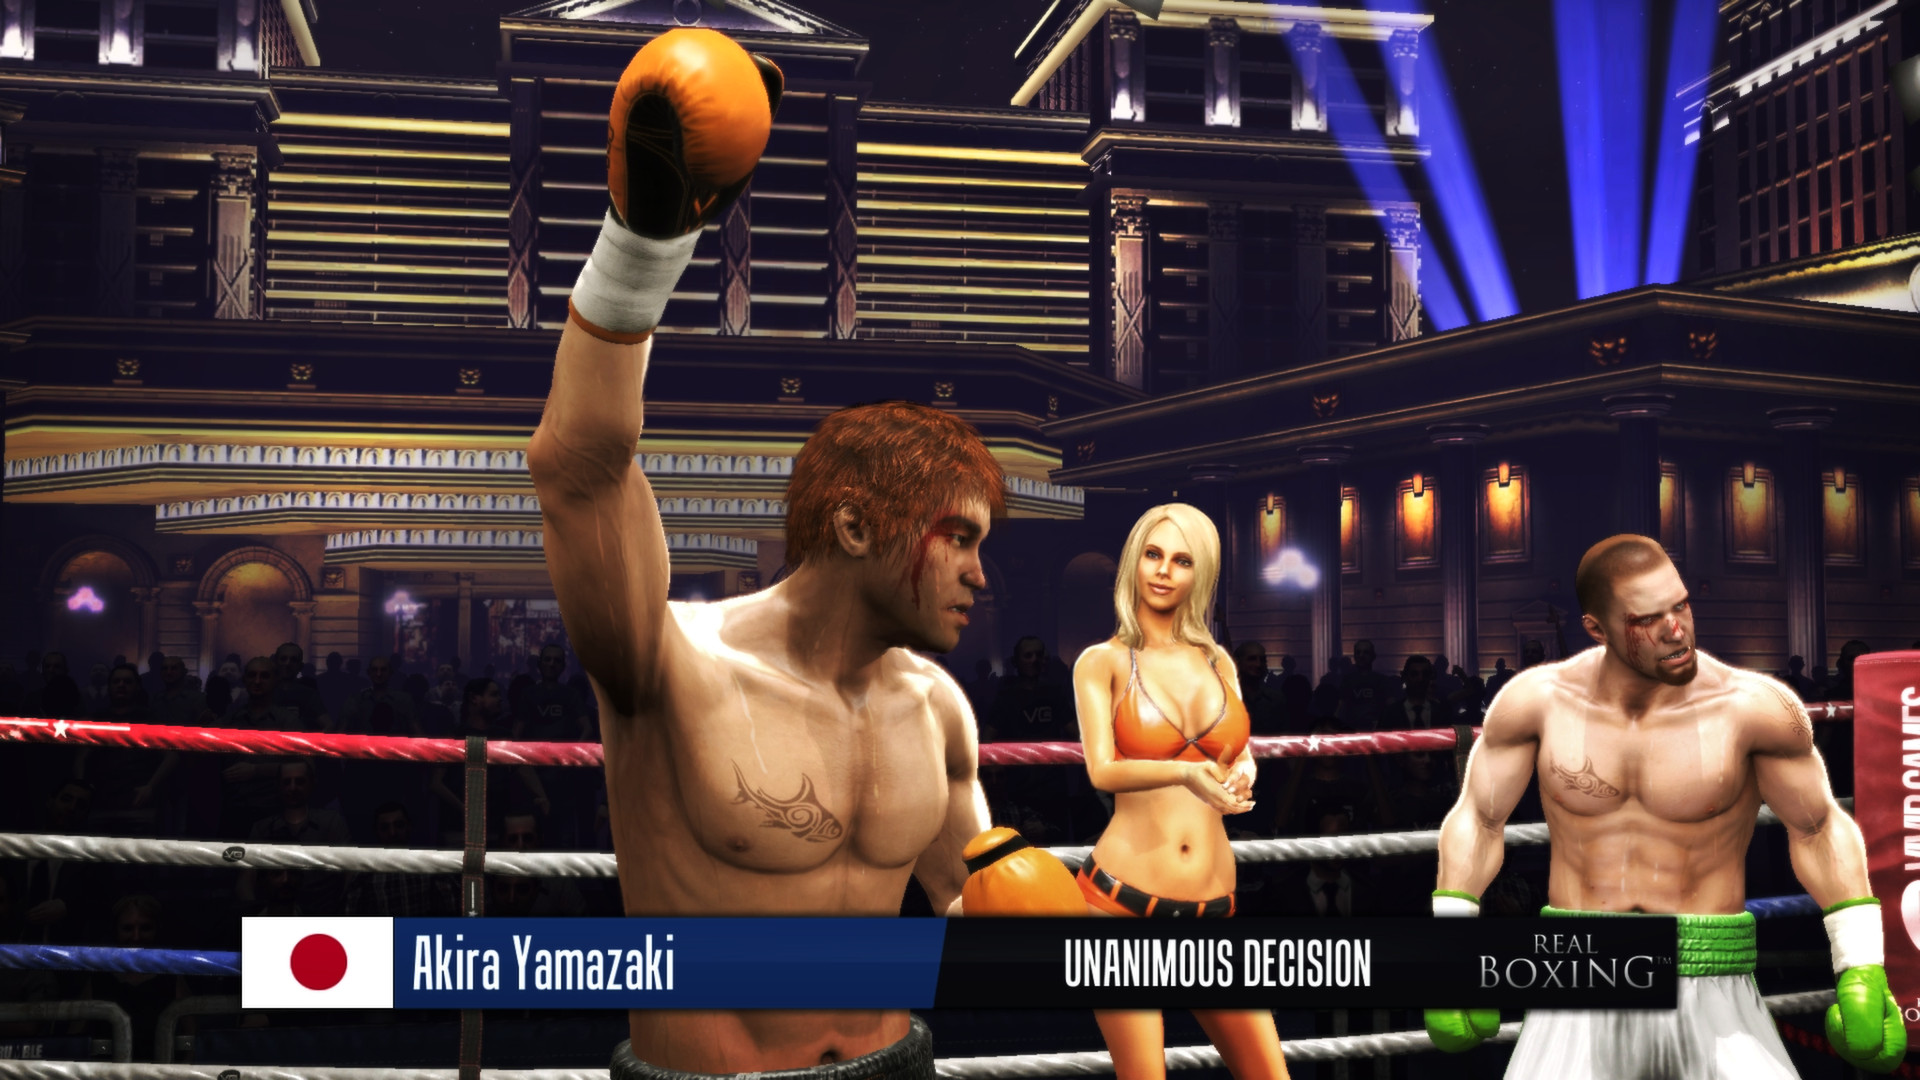 real boxing games free download